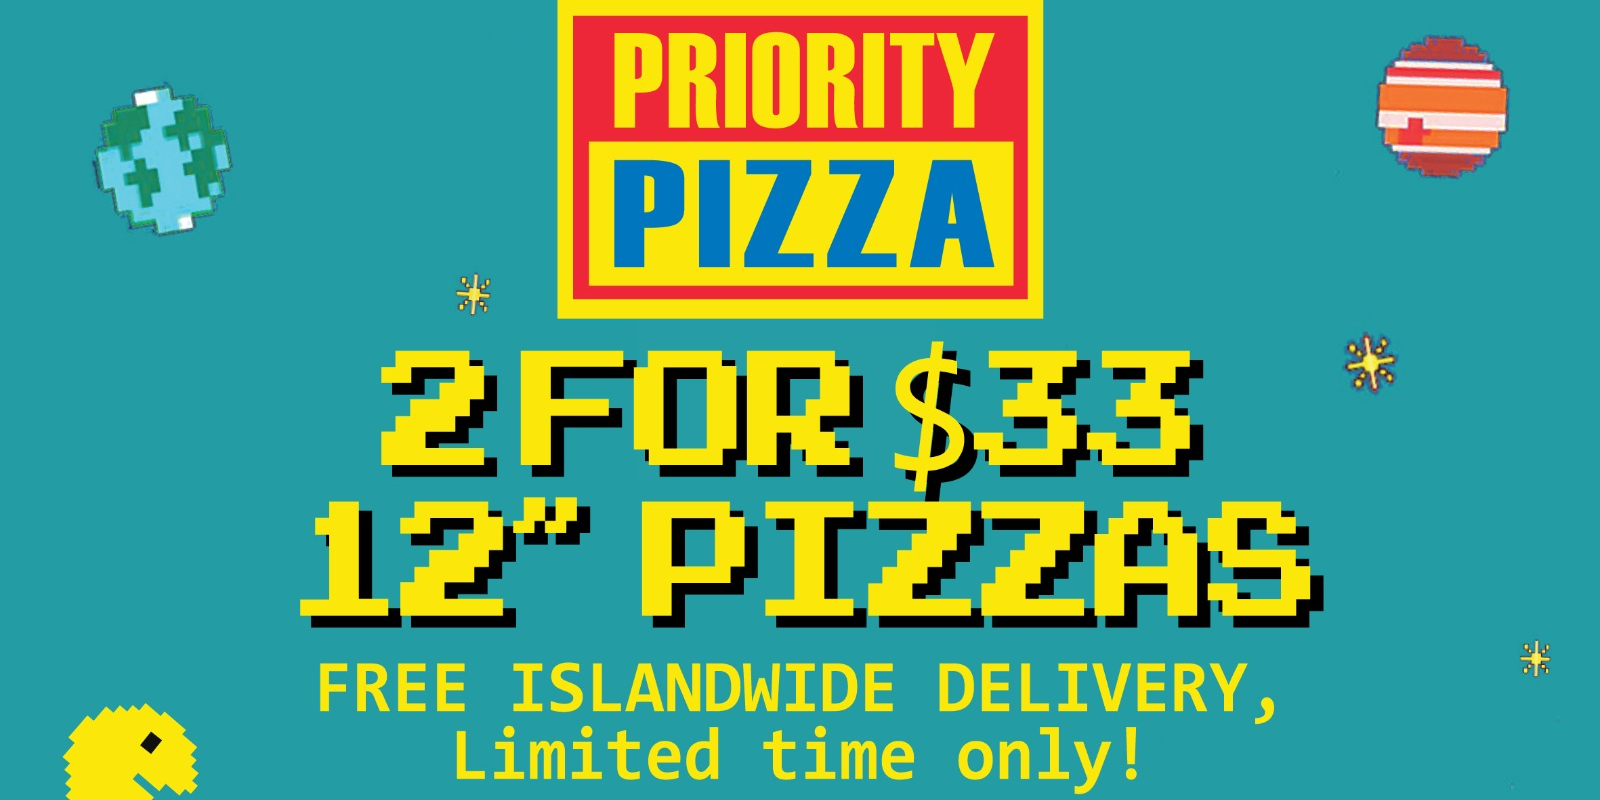 Two 12” Pizzas for only $33 at The Priority Club!